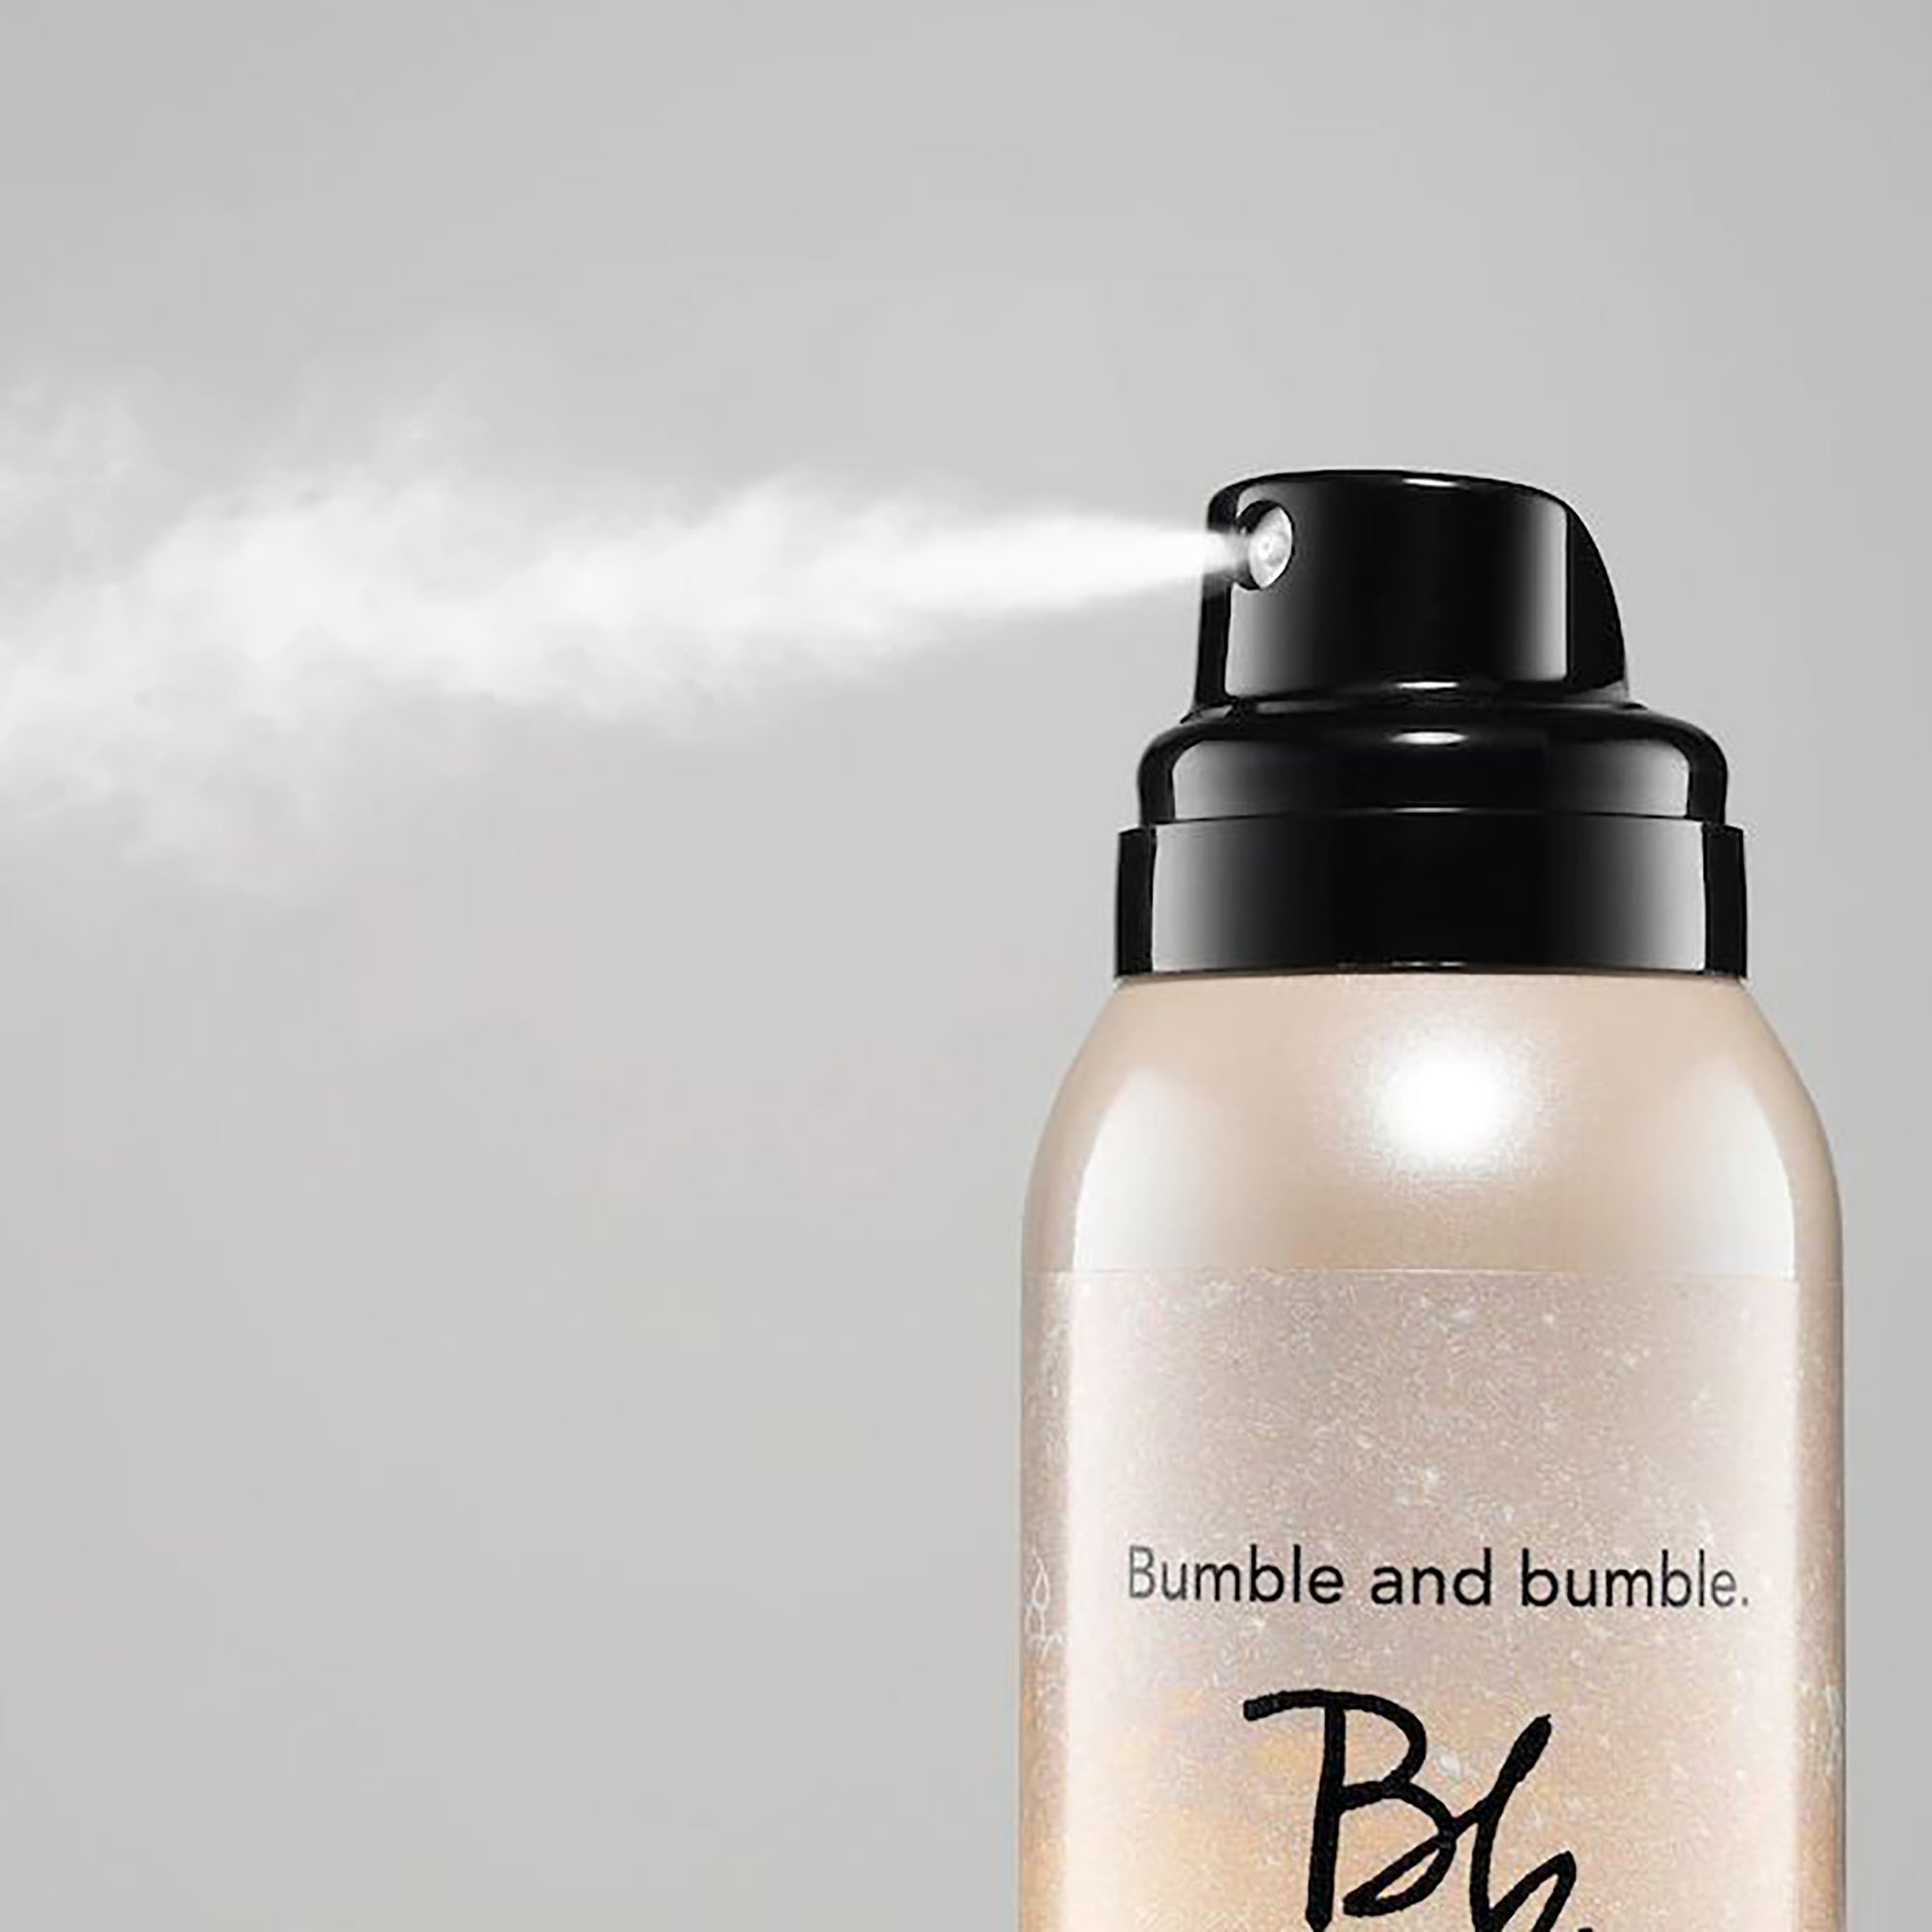 Bumble and bumble Pret-a-Powder Tres Invisible Dry Shampoo / 3.1OZ